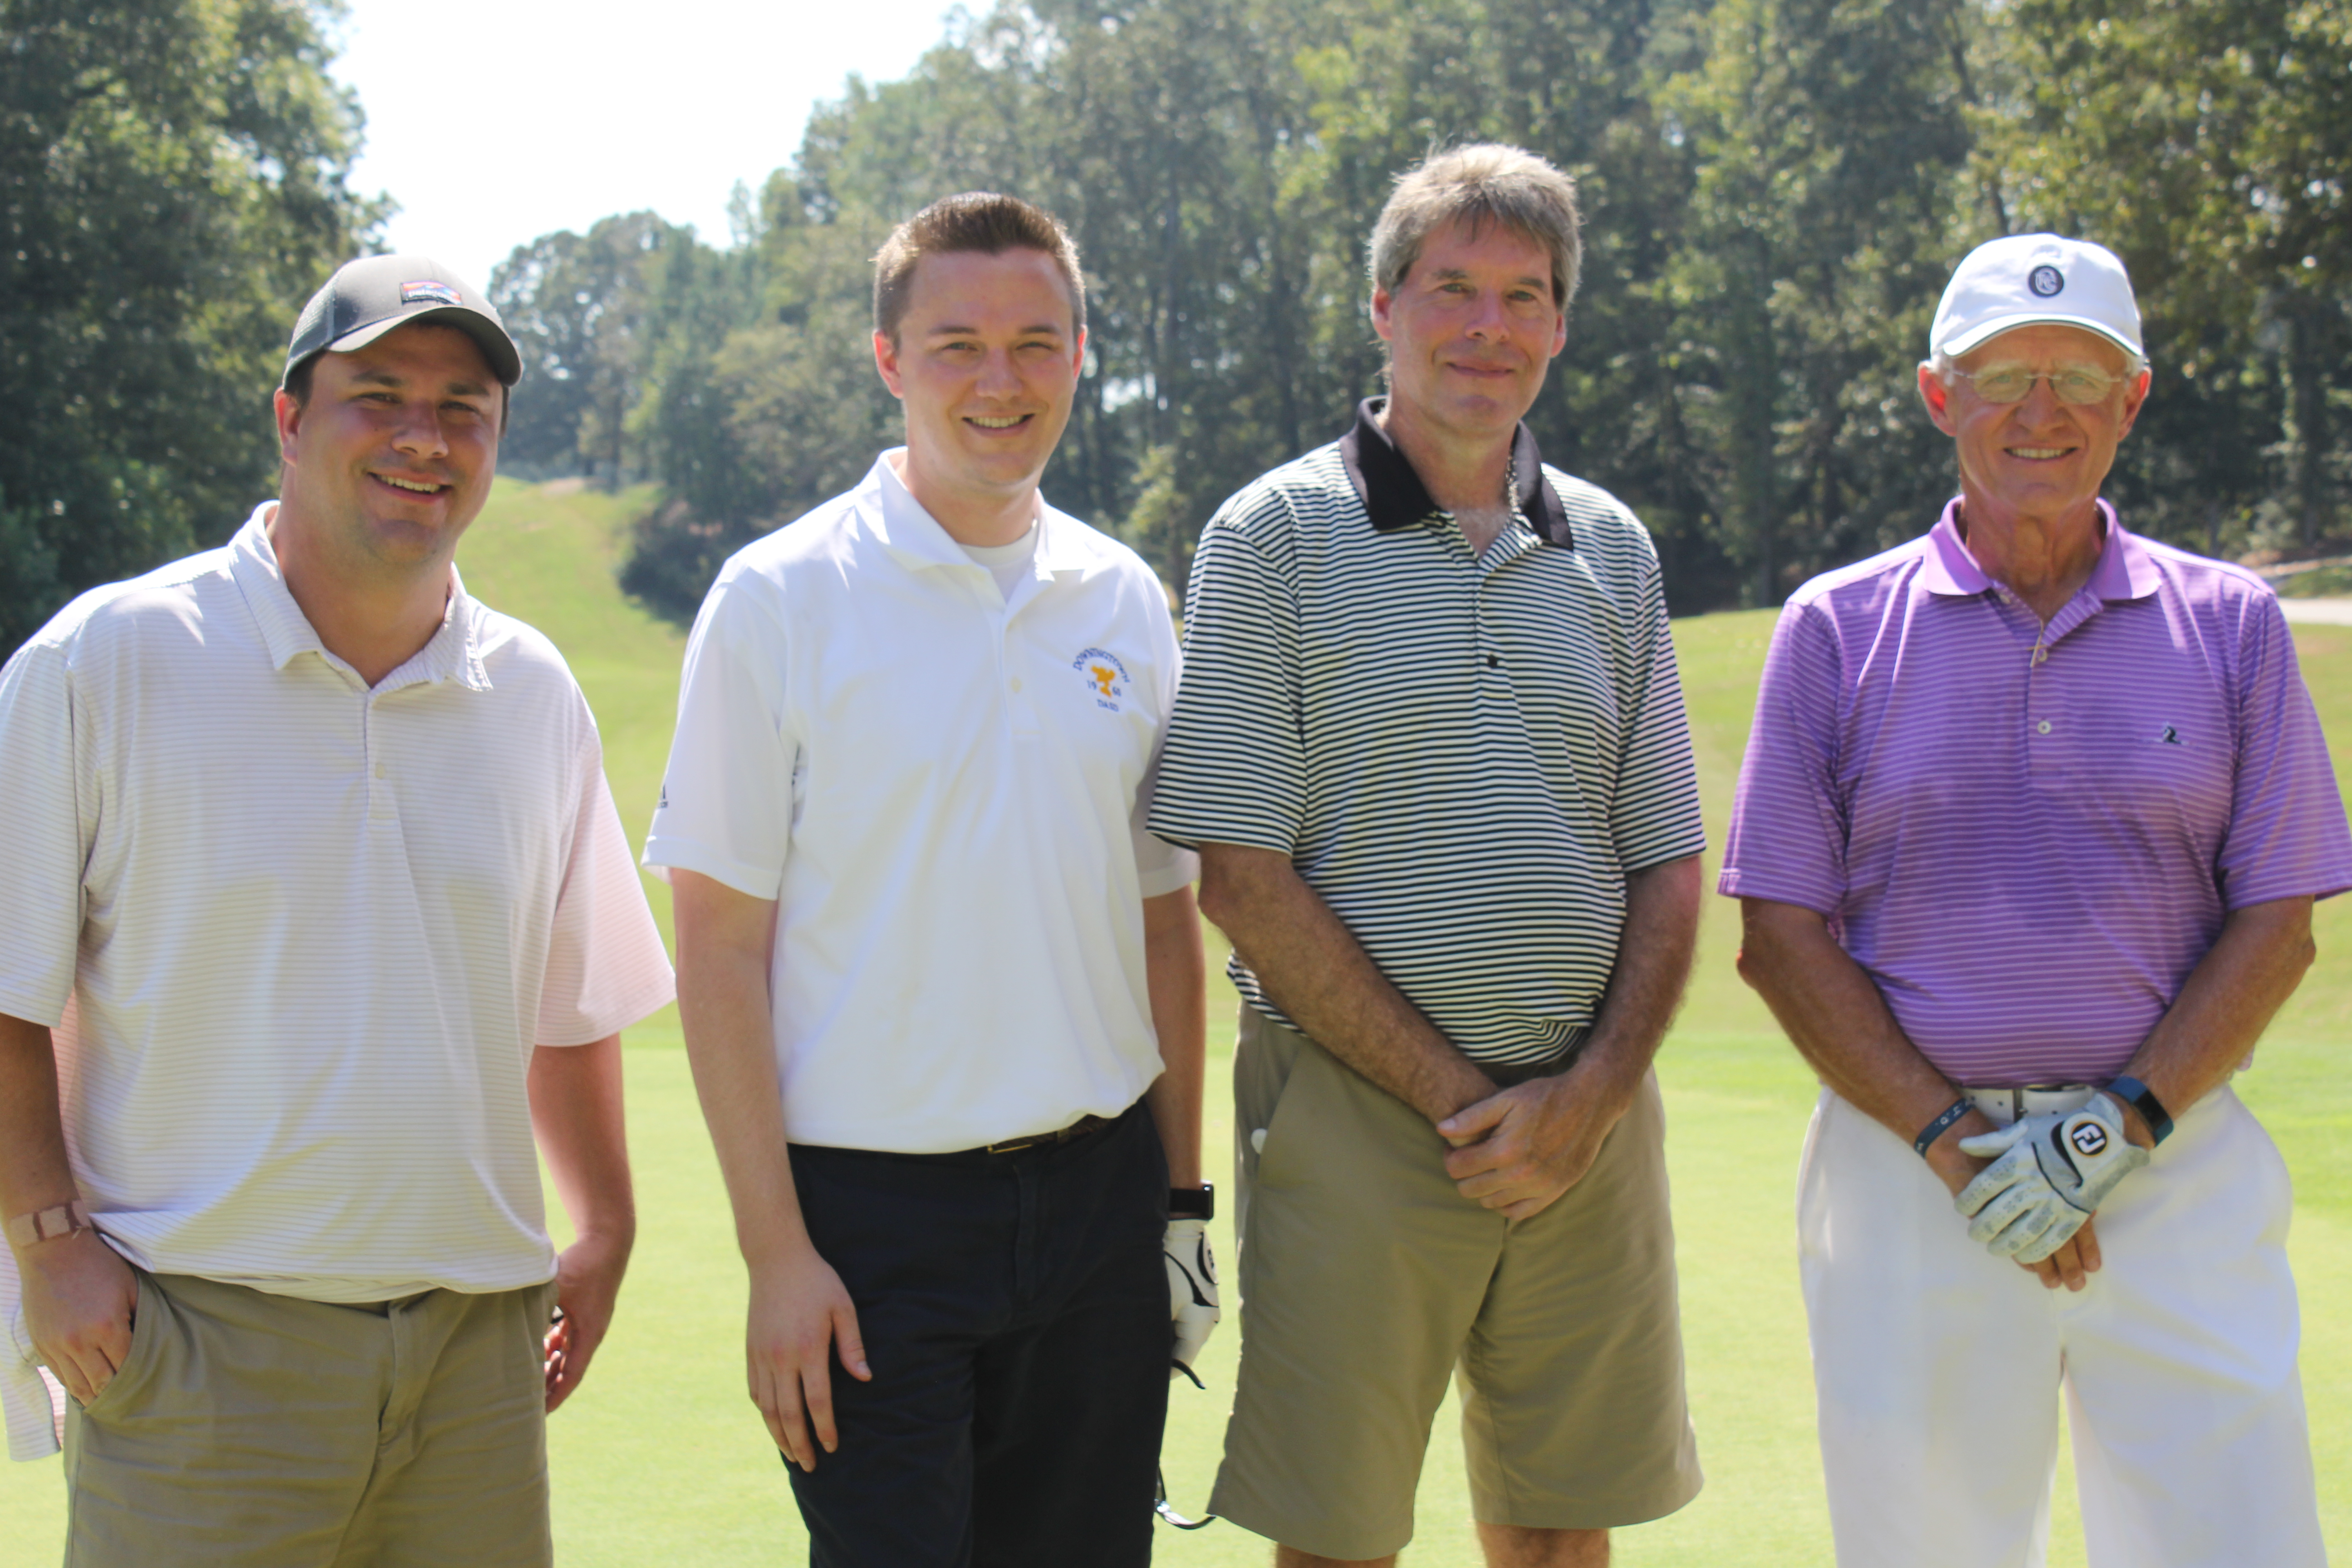 Builders Ins Group Charity Golf Tournament